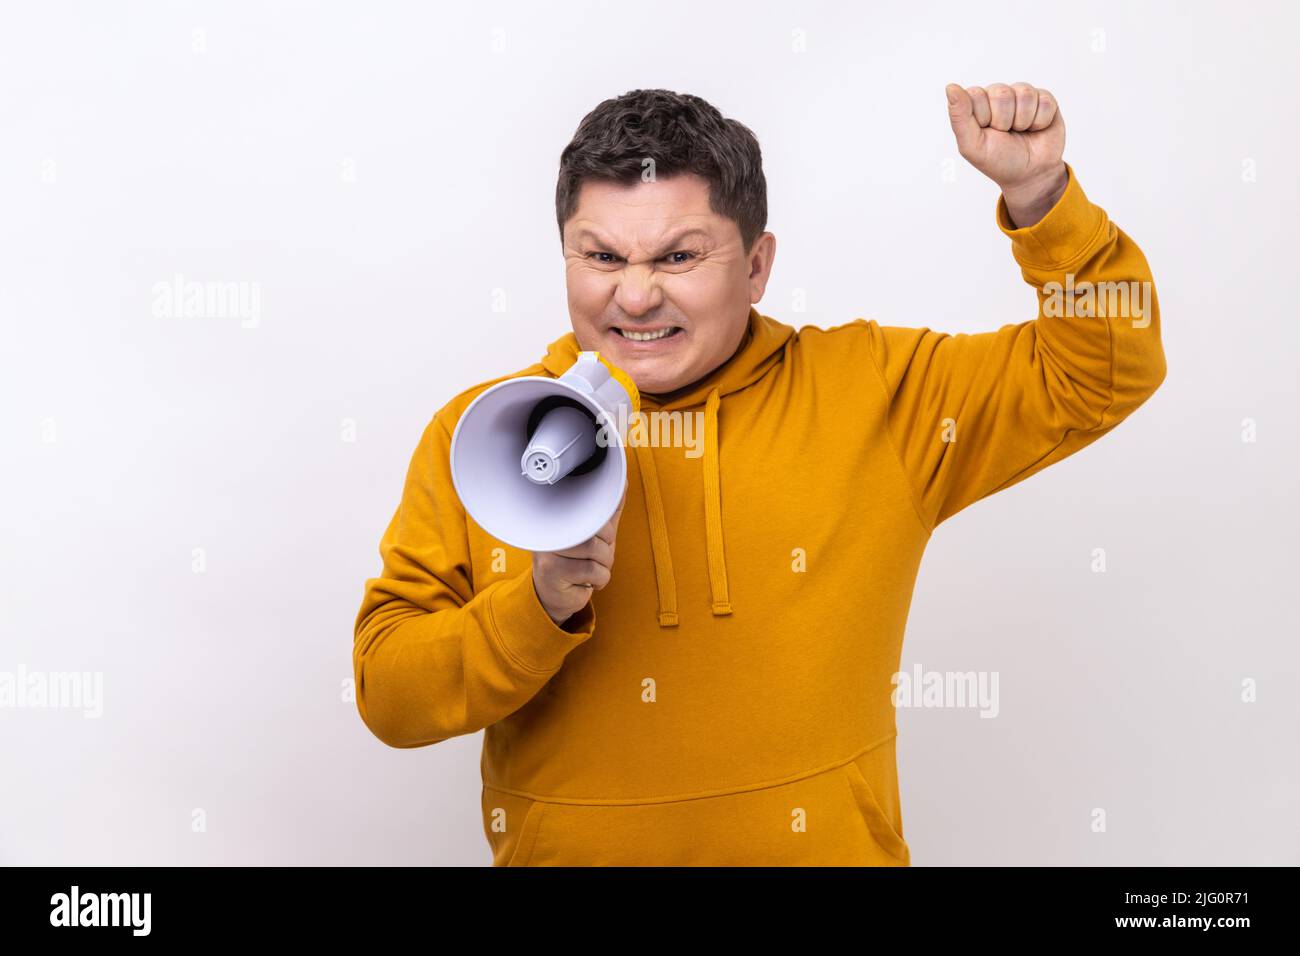 Angry nervous middle aged man loudly screaming at megaphone, making announce, protesting, wants to be heard, wearing urban style hoodie. Indoor studio shot isolated on white background. Stock Photo